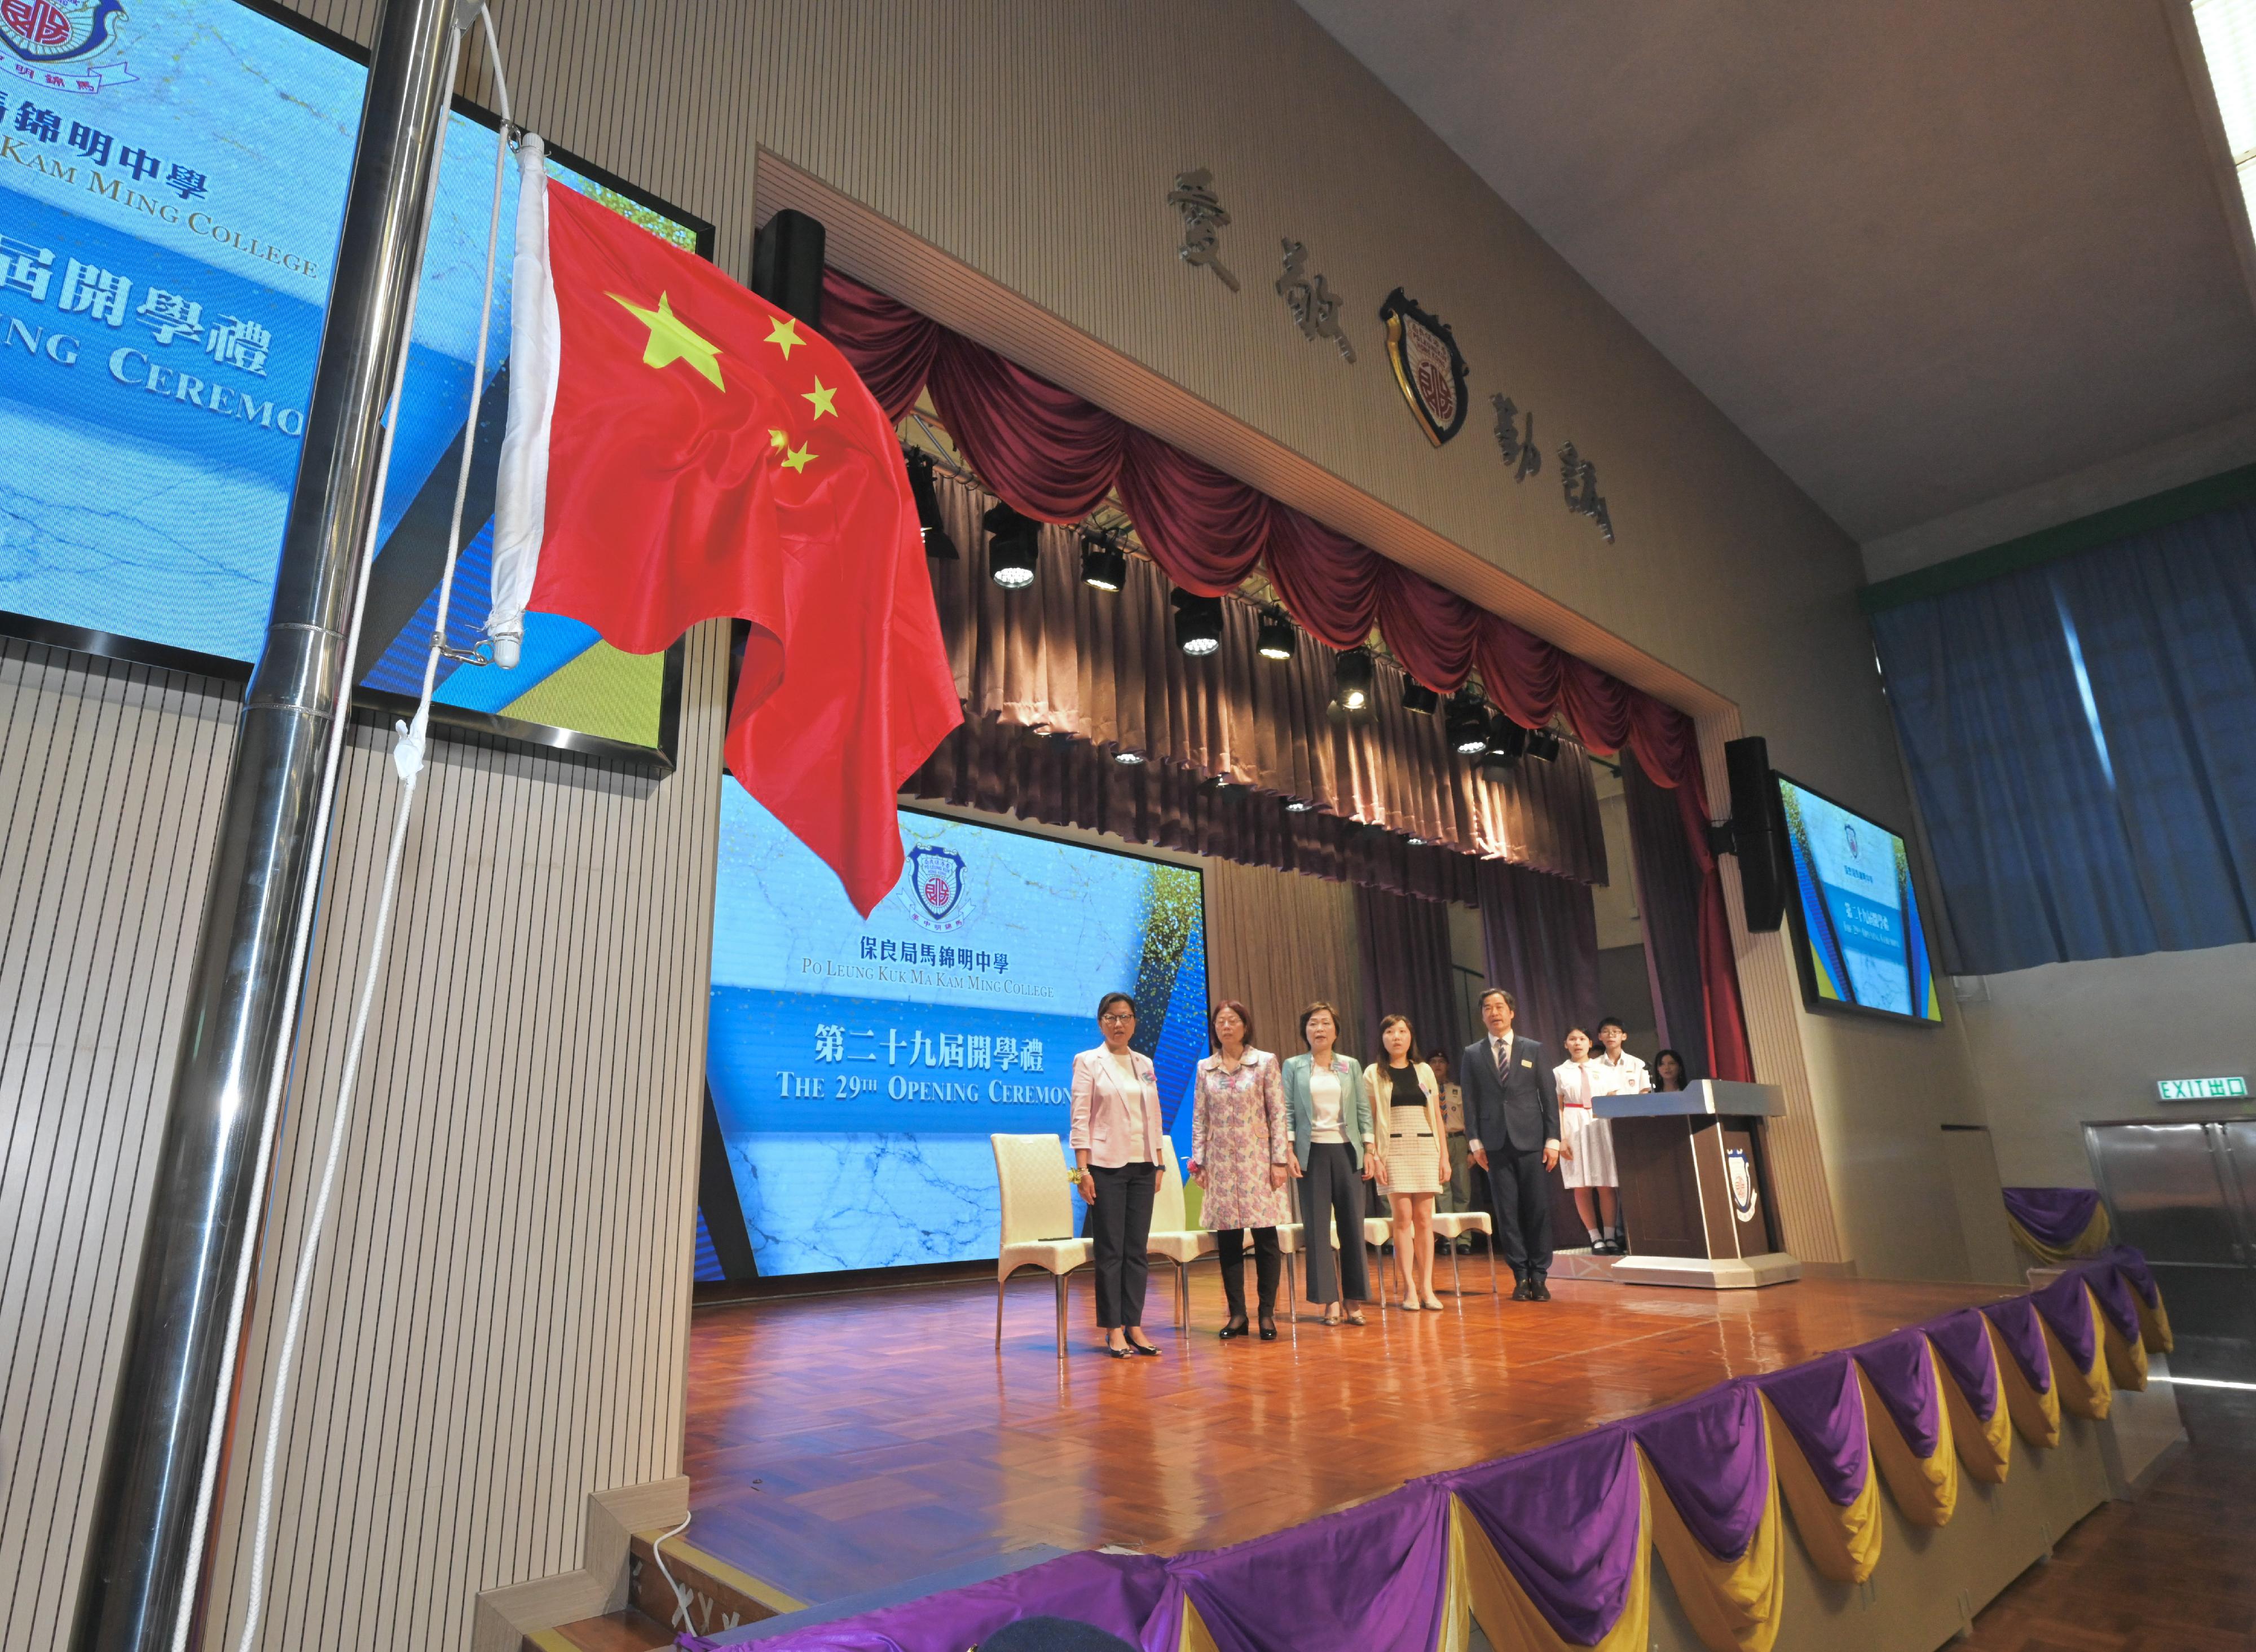 The Secretary for Education, Dr Choi Yuk-lin, visited Po Leung Kuk Ma Kam Ming College on the first school day today (September 4). Photo shows Dr Choi (third left) singing the national anthem and viewing the raising of the national flag at the school opening ceremony.